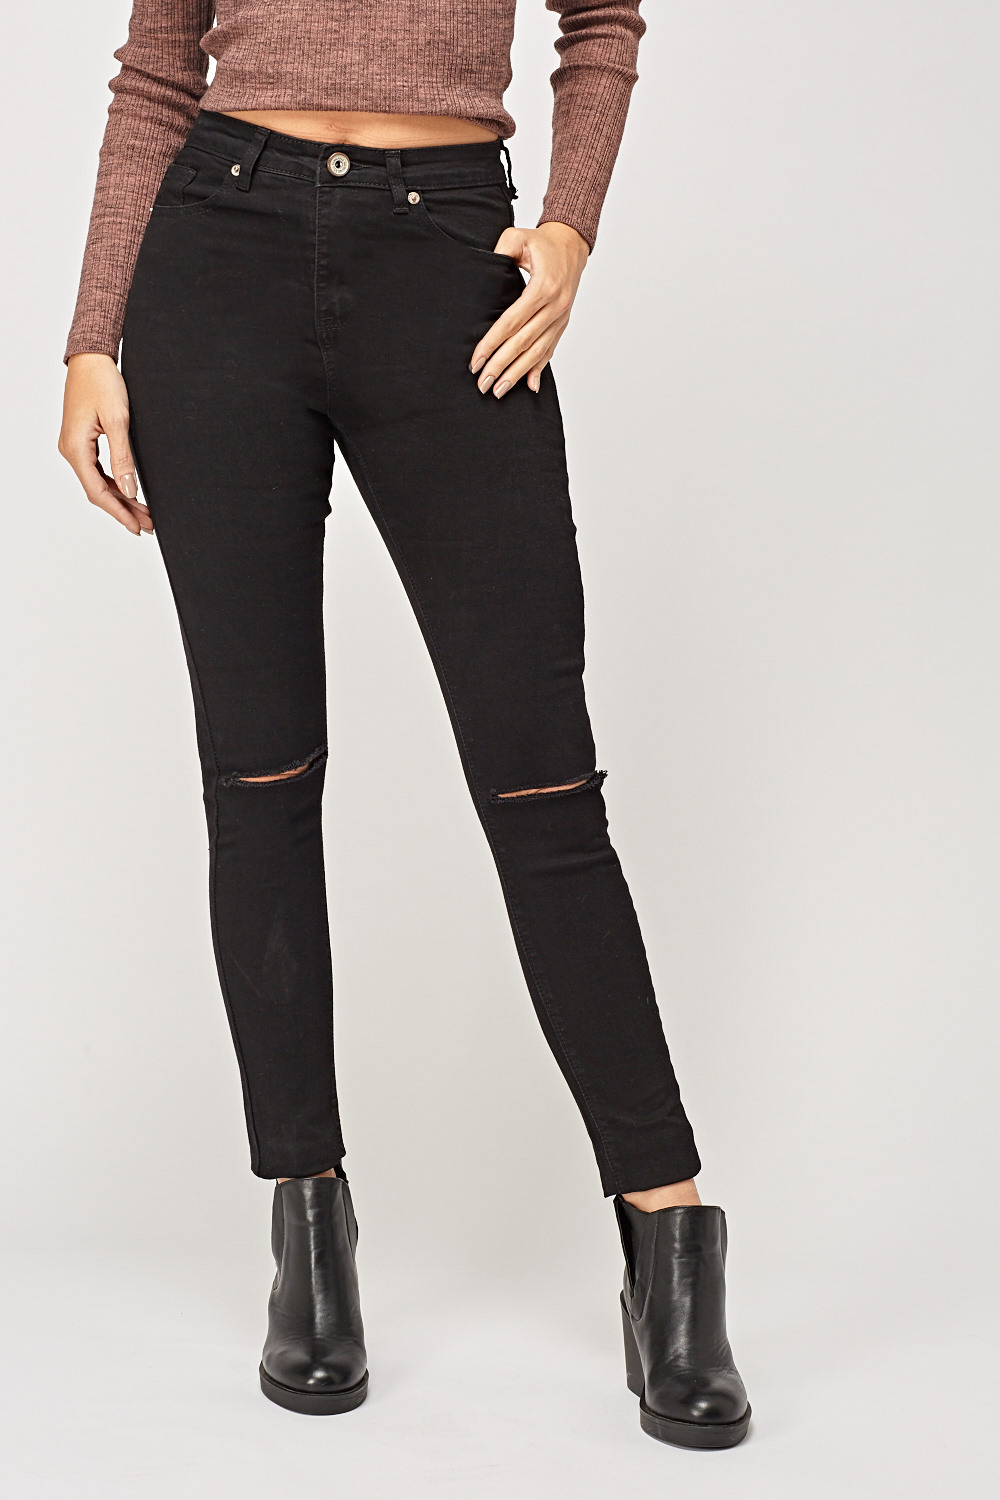 Ripped Knee Black Jeans Just 7